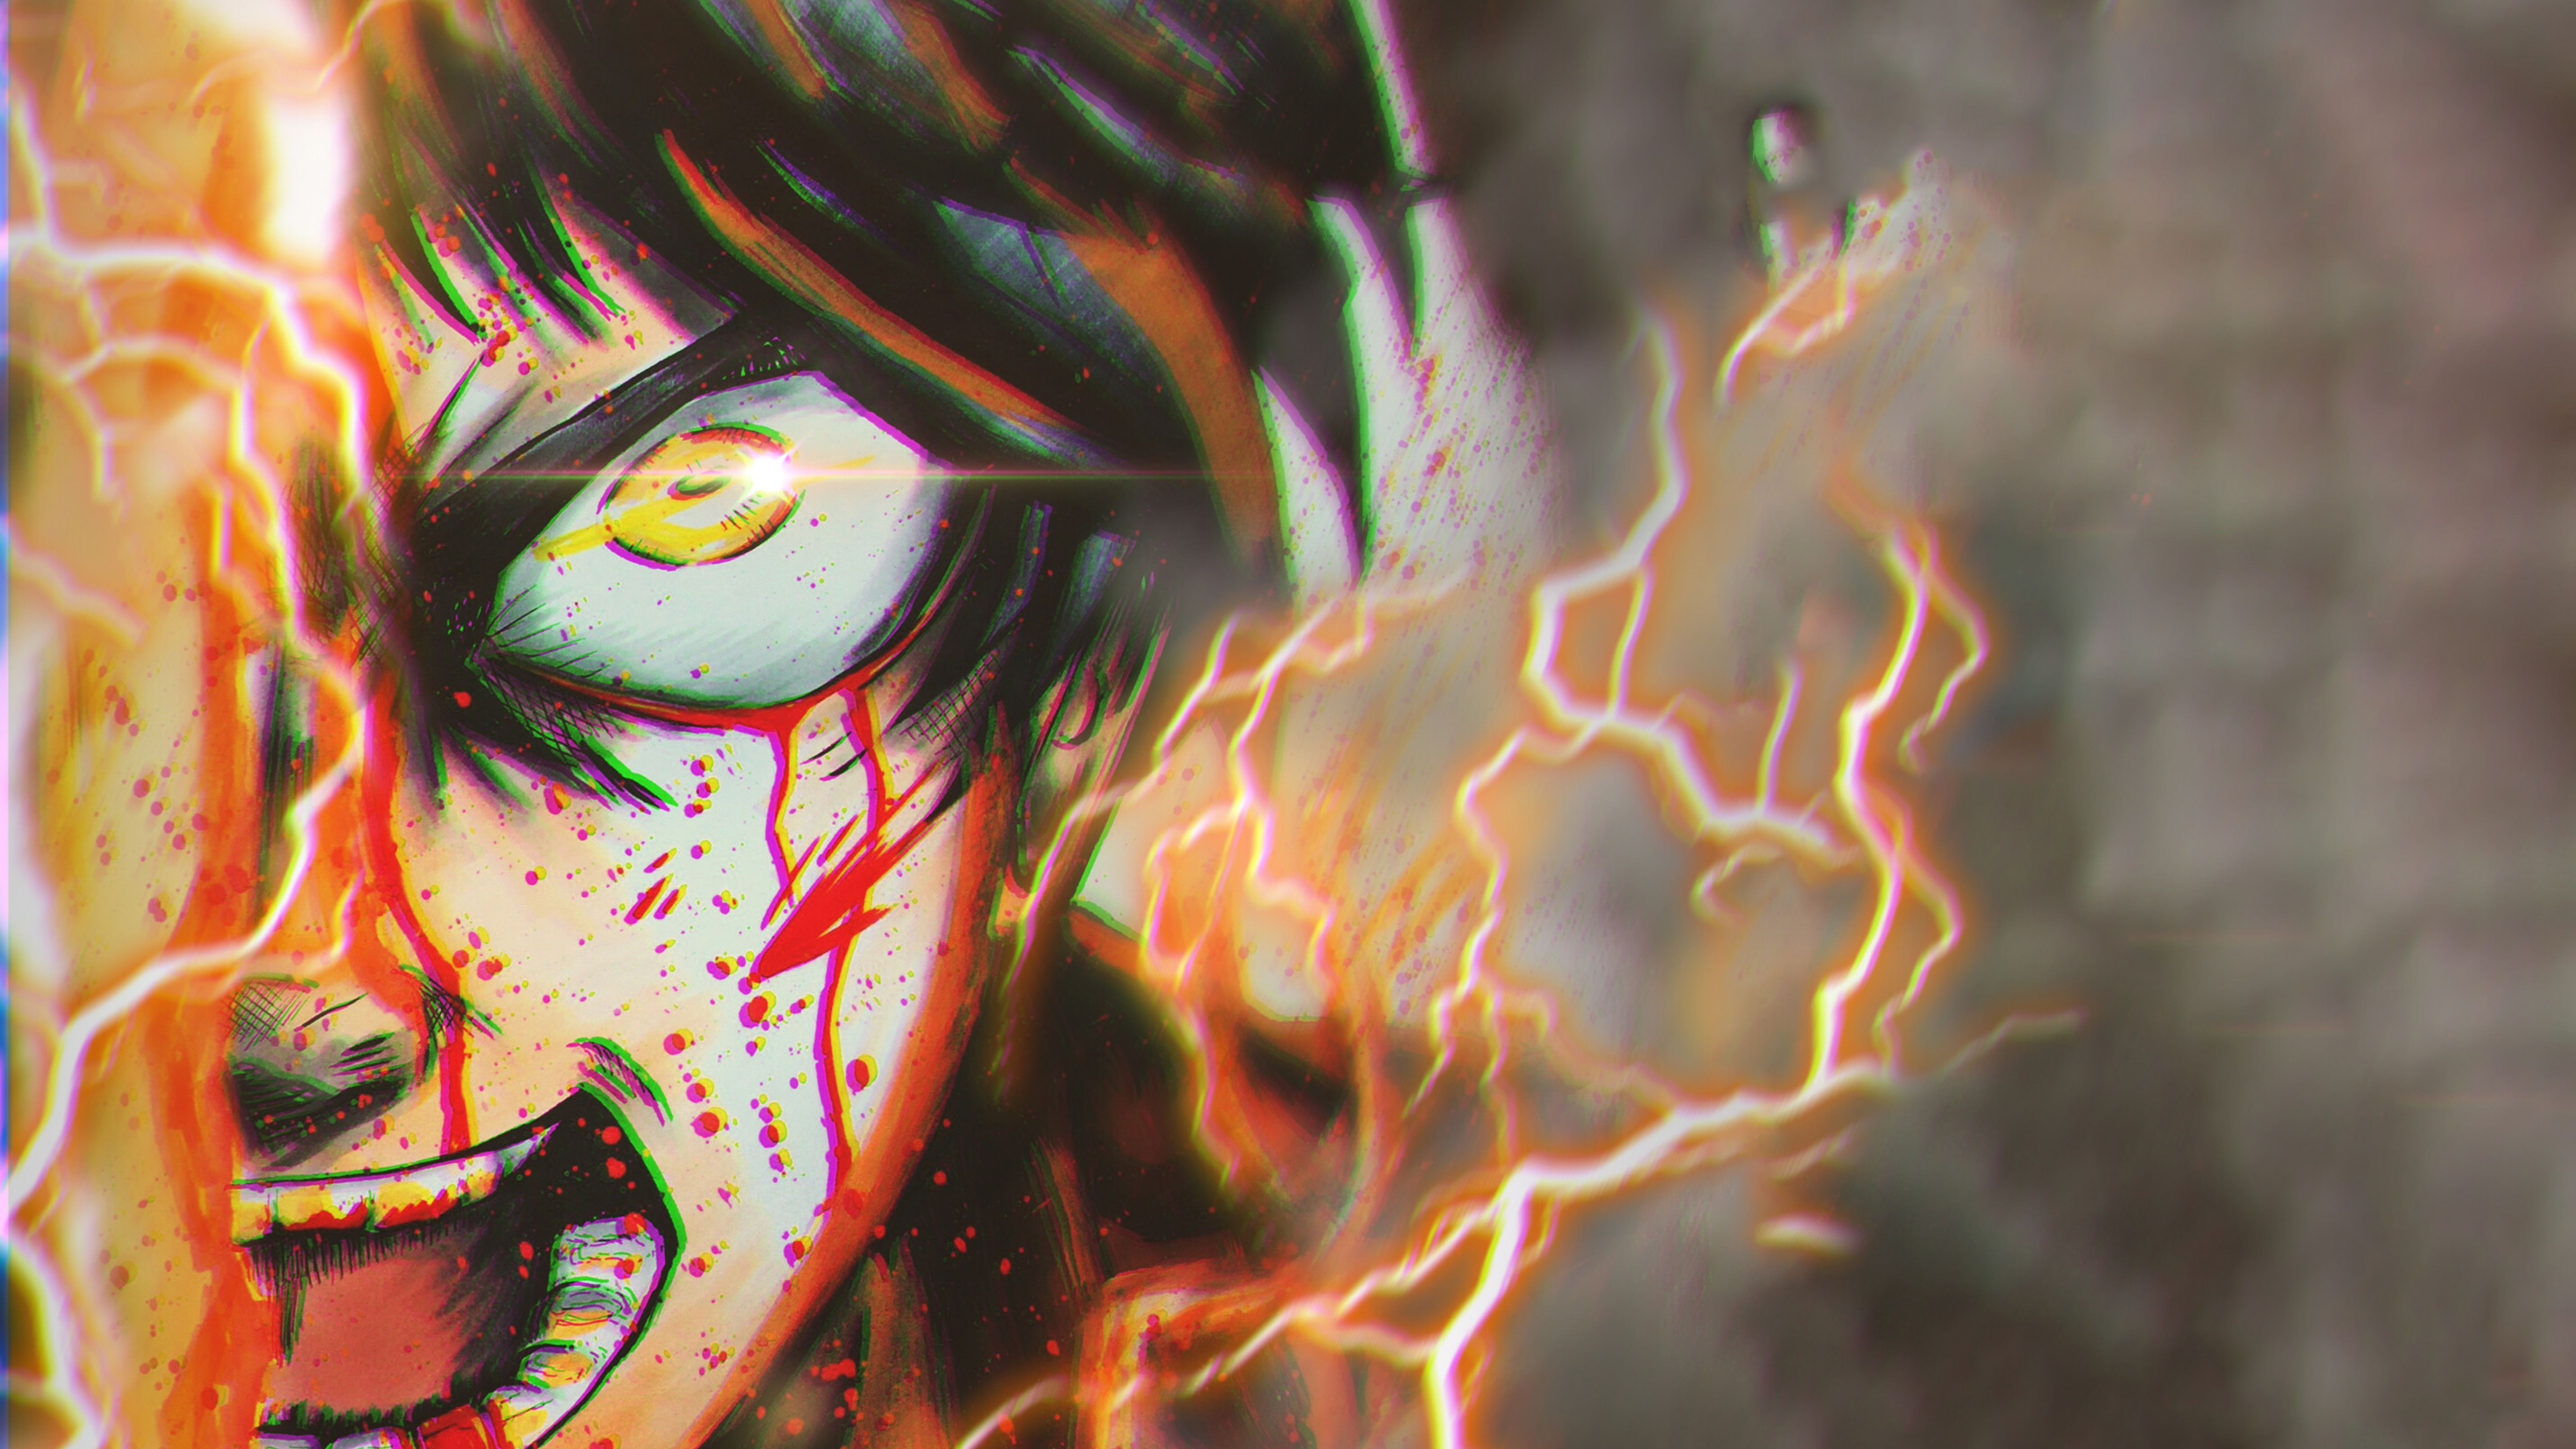 Eren Yeager In AOT 8K Wallpaper, HD Anime 4K Wallpaper, Image, Photo and Background